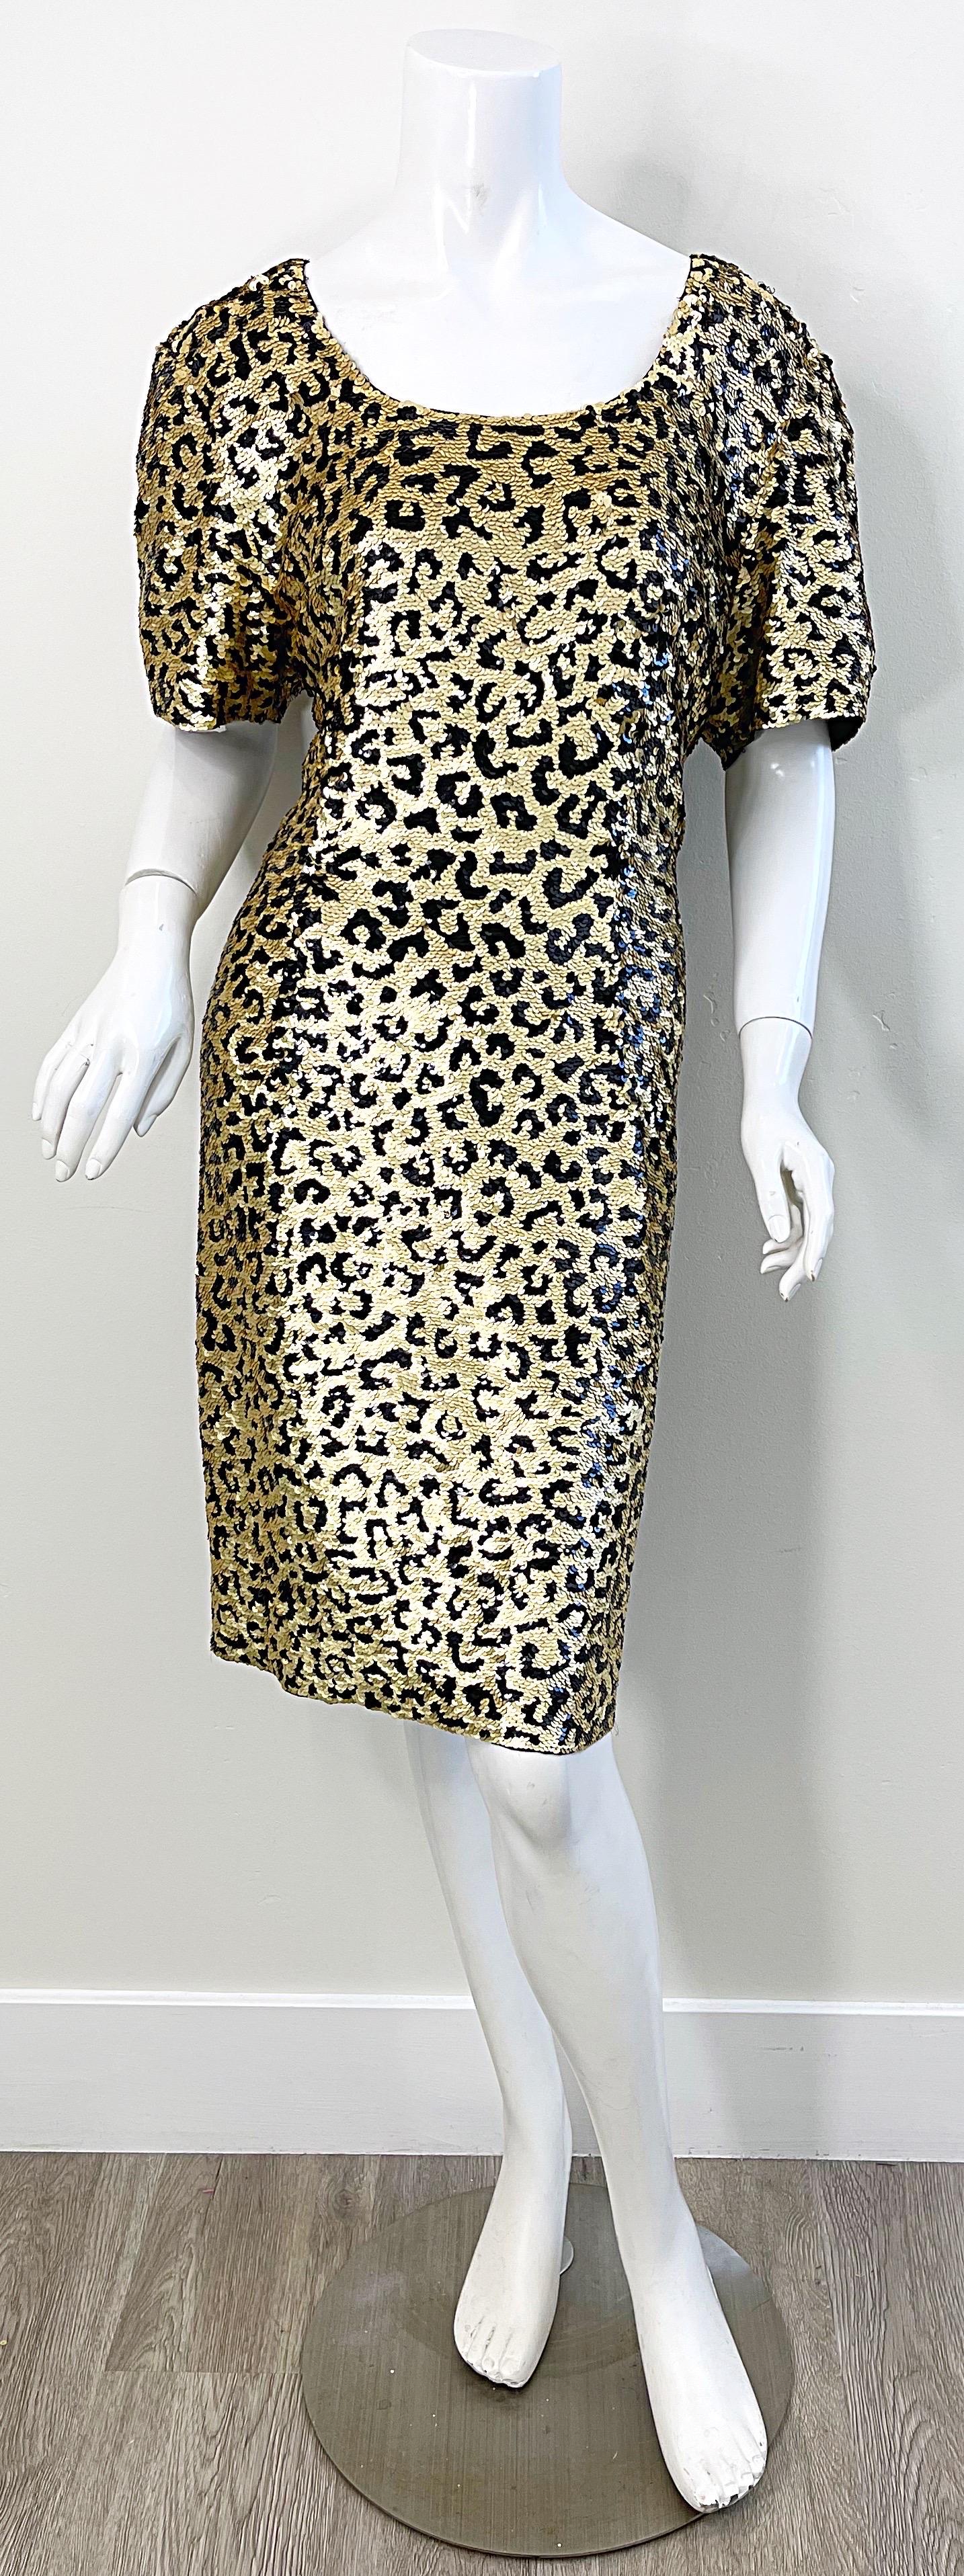 Fabulous 1980s vintage OLEG CASSINI fully sequined leopard print short sleeve silk dress ! Features thousands of hand-sewn gold and black sequins throughout the entire dress. Hidden zipper up the back with hook-and-eye closure.
Great belted or